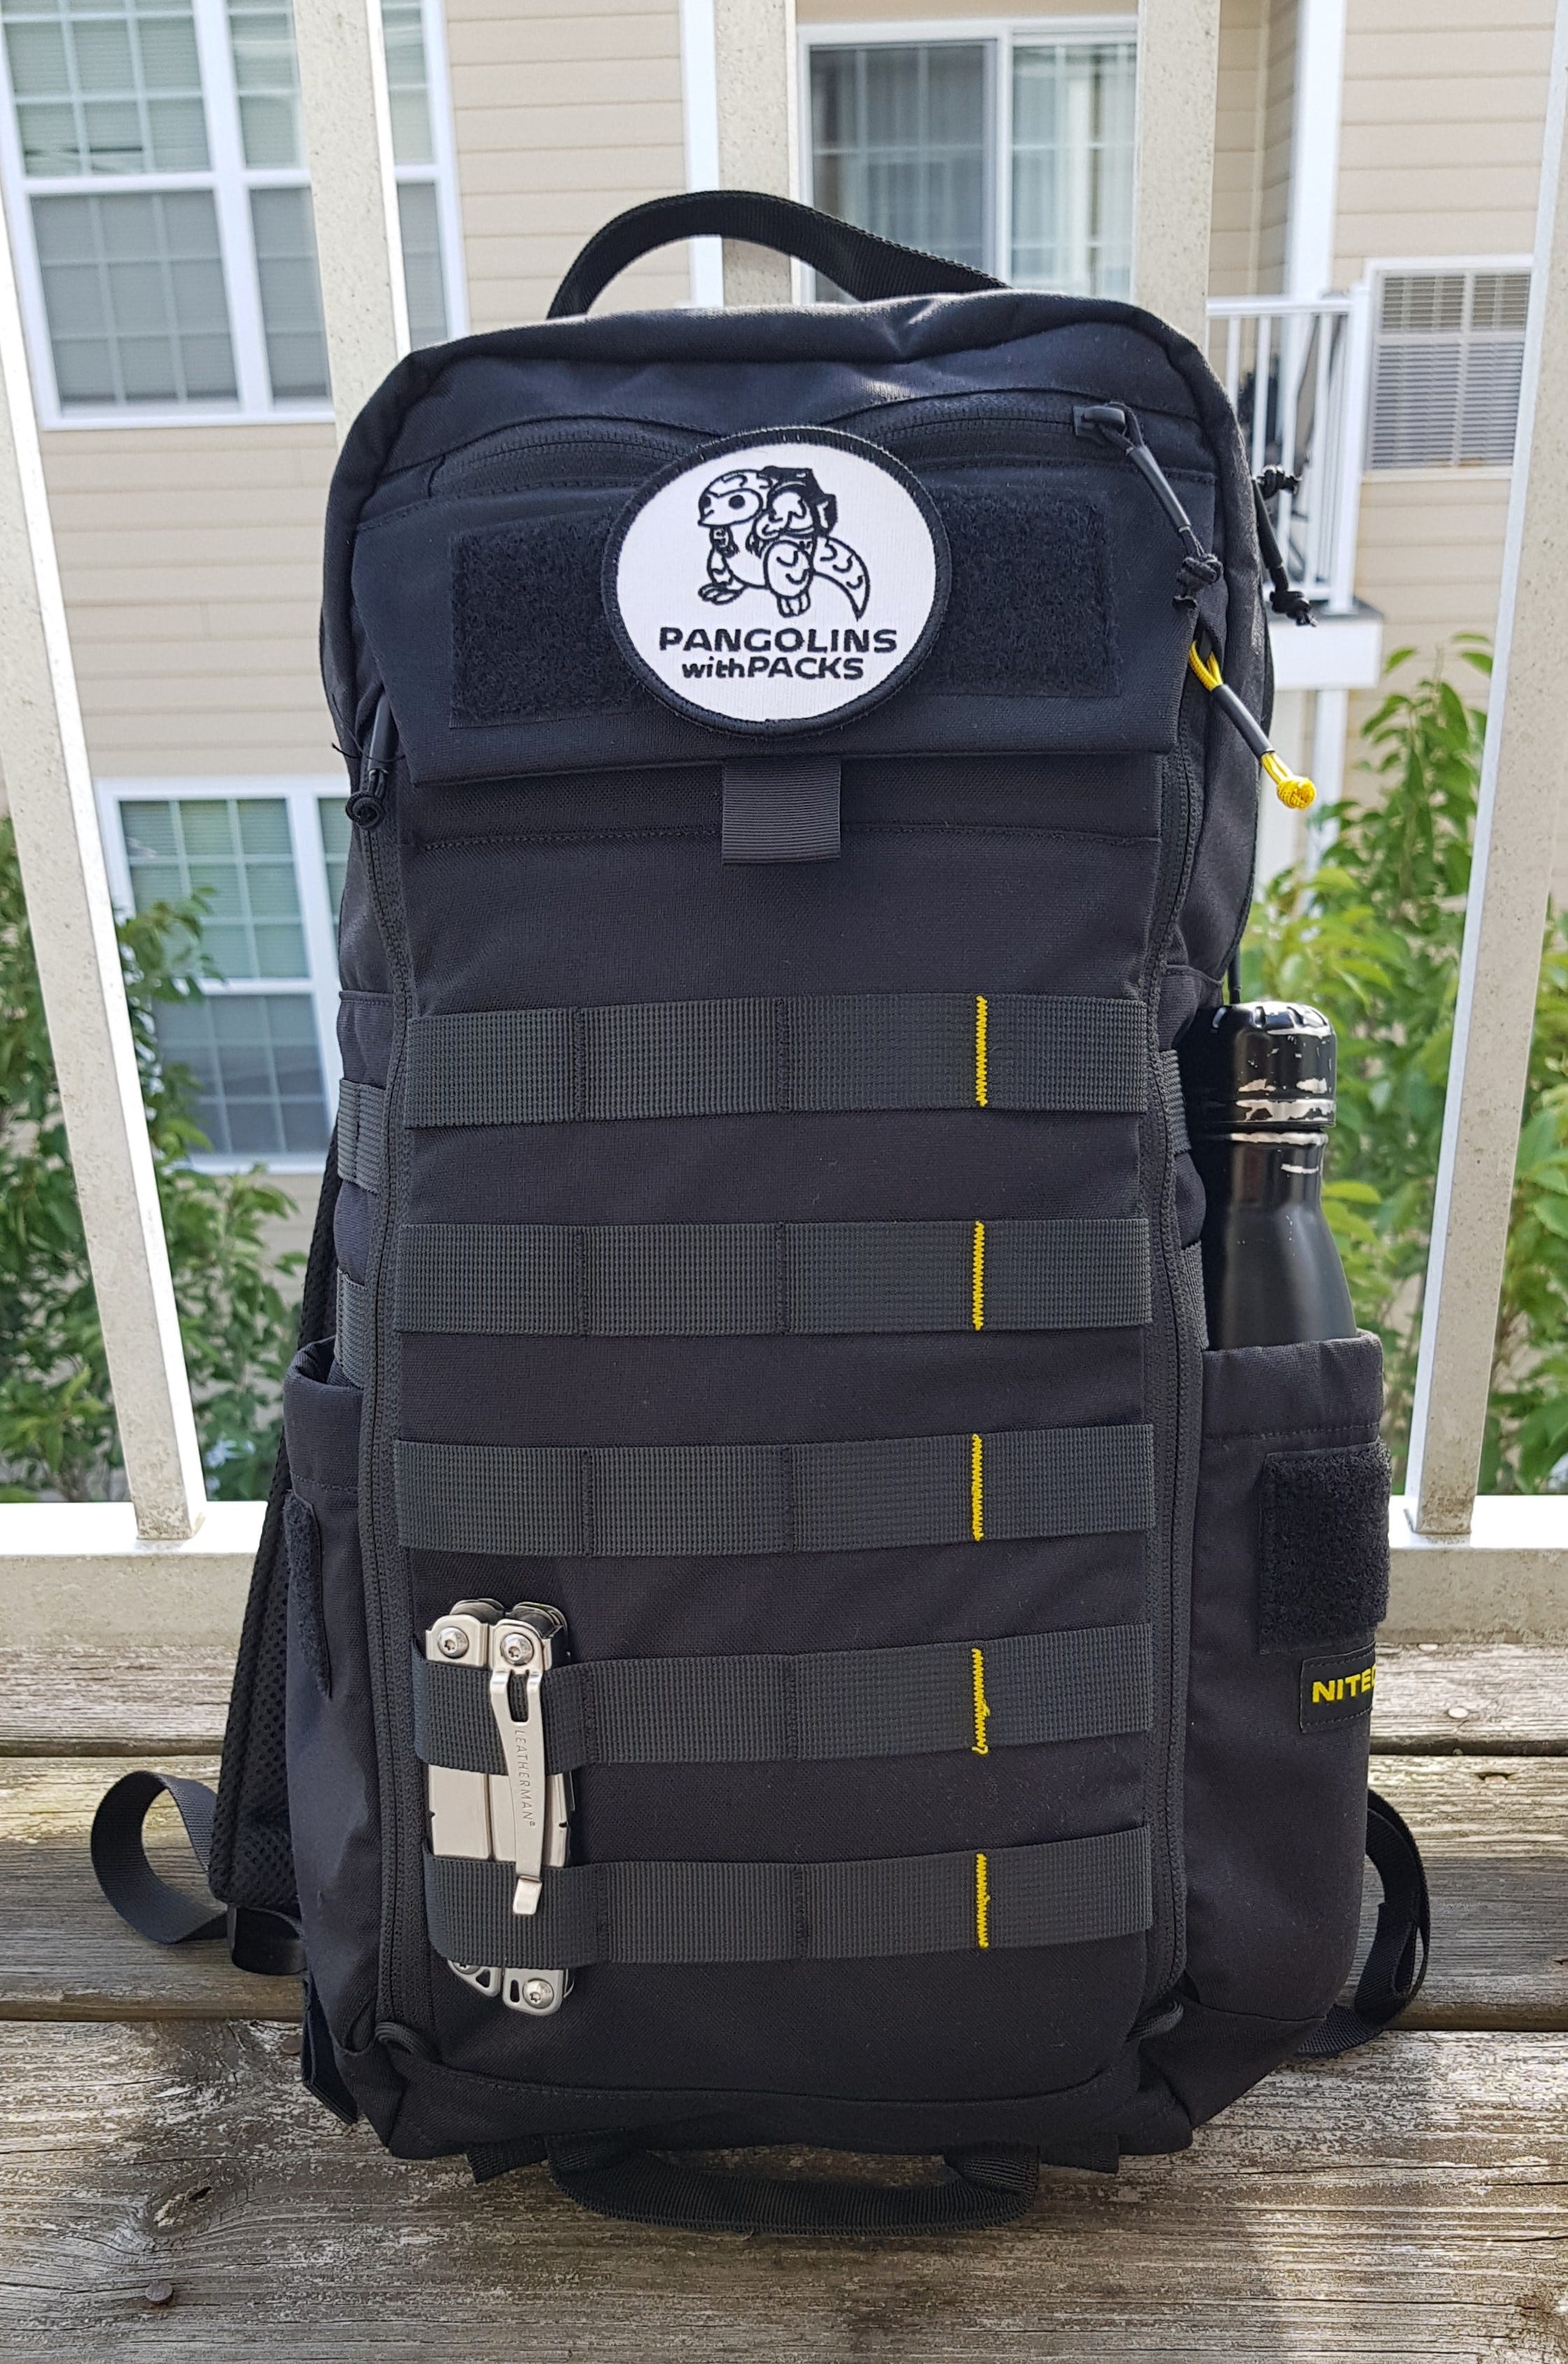 Nitecore BP18 Backpack Review. Though Nitecore is best known for its…, by  Geoff